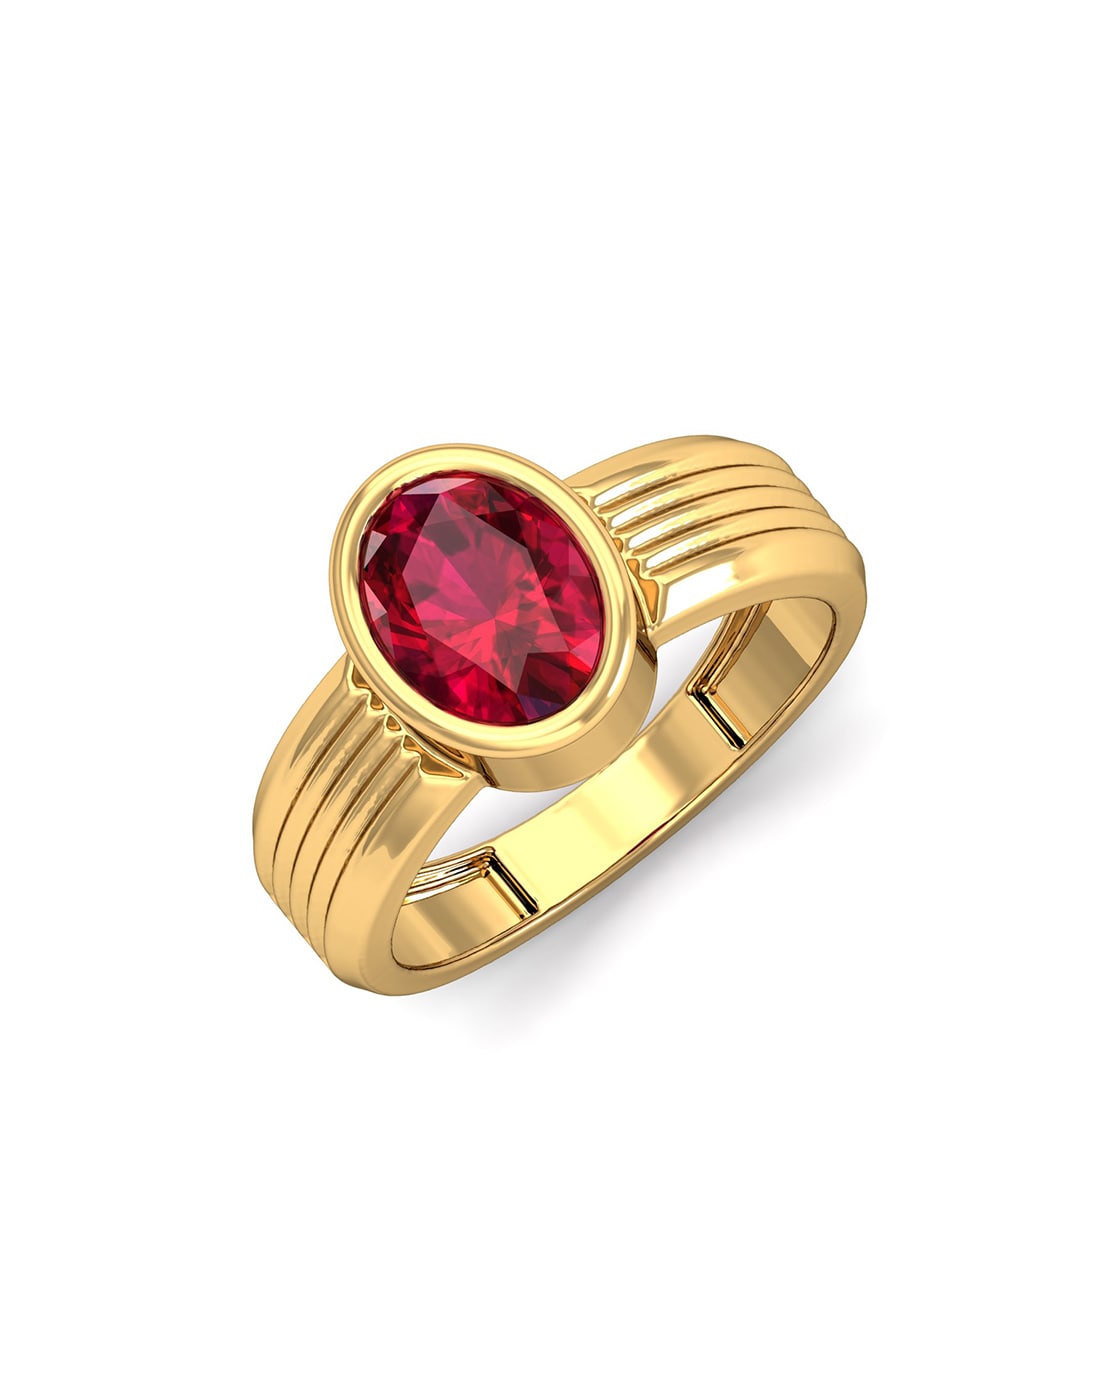 Buy SIDHARTH GEMS Certified Ruby (Manik) 9.40 carats or 10.25 ratti 92.5  Sterling Silver Gold Plated Ring Natural Ruby Gemstone Ring for Men's and  Women's at Amazon.in